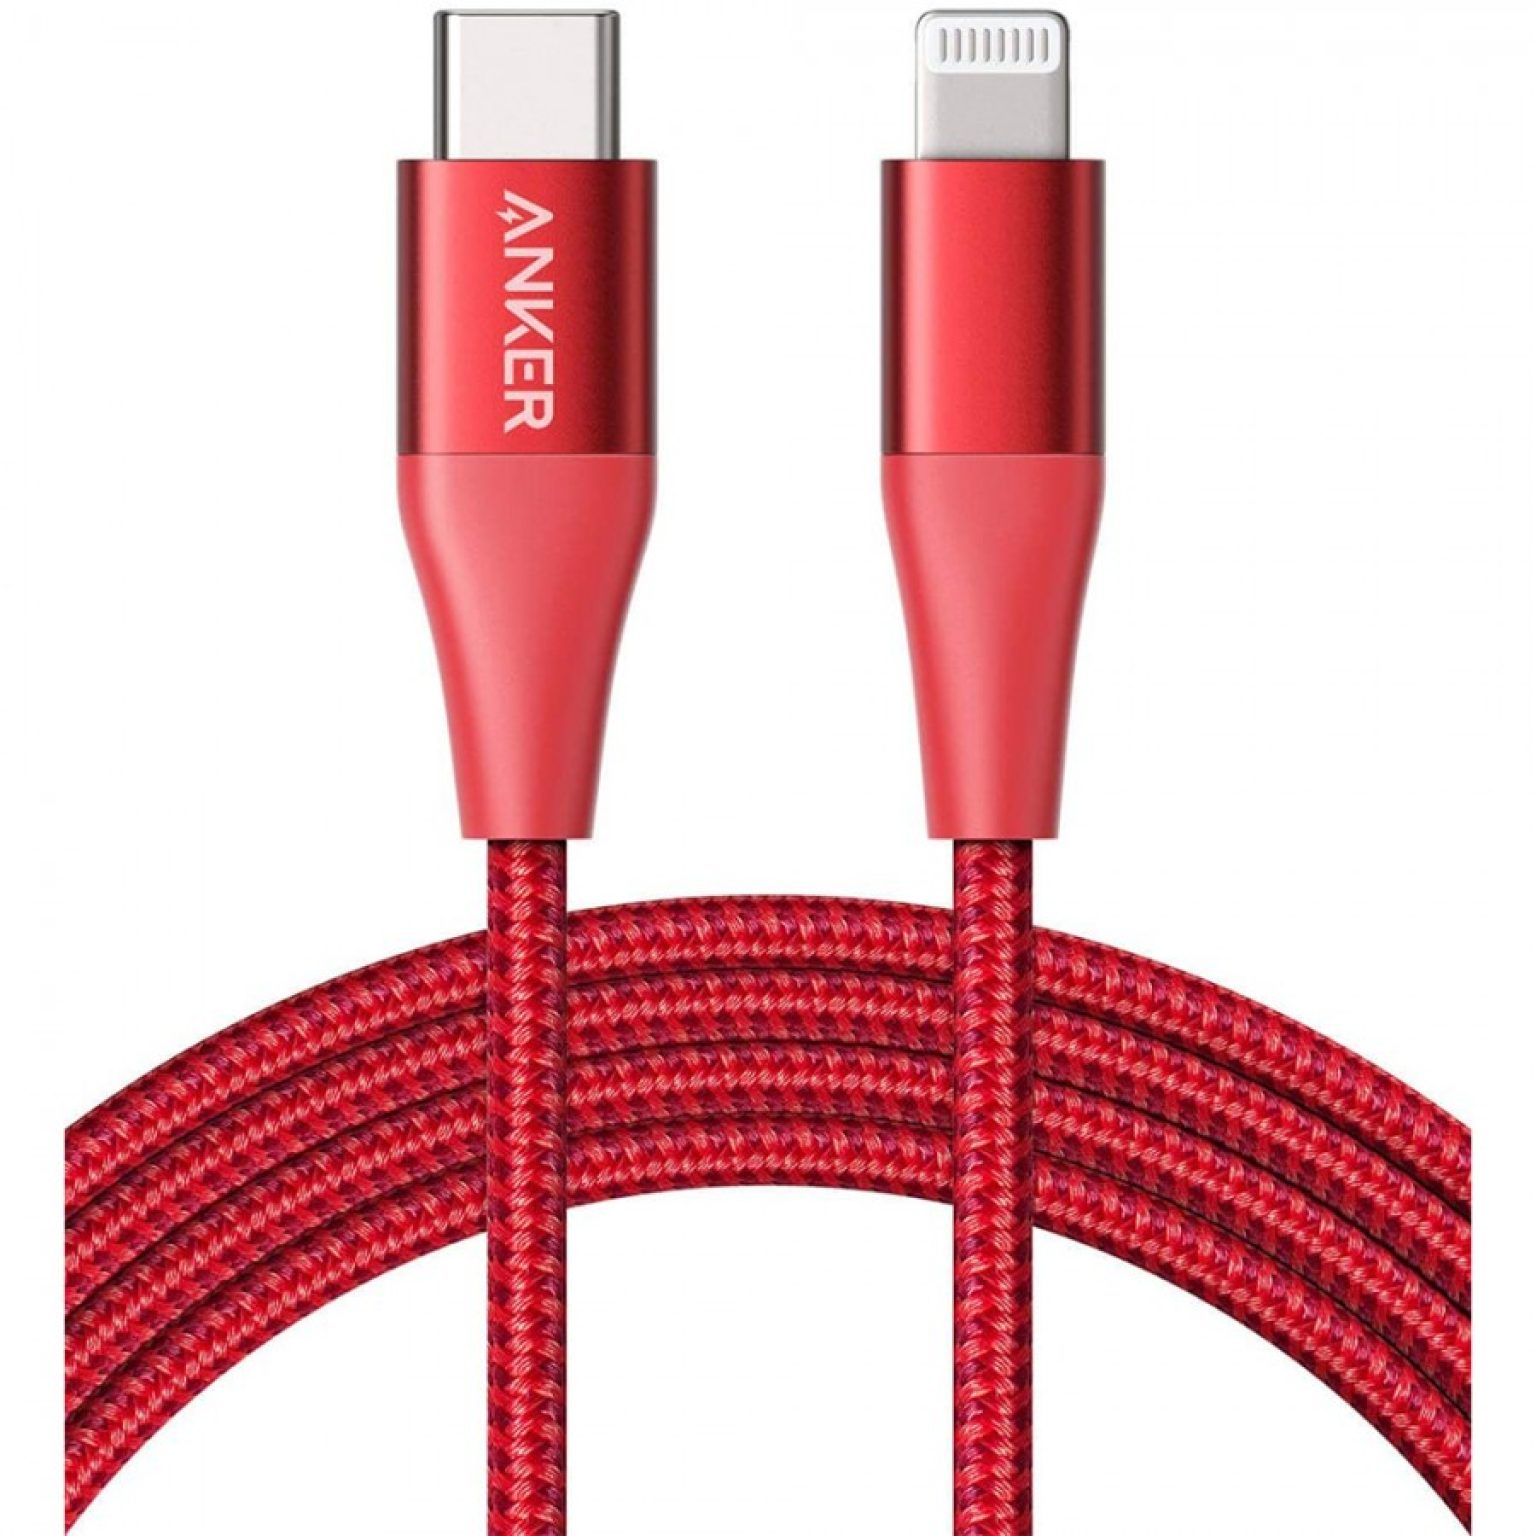 900 anker a8652 usb c to lightning cable 09m 7